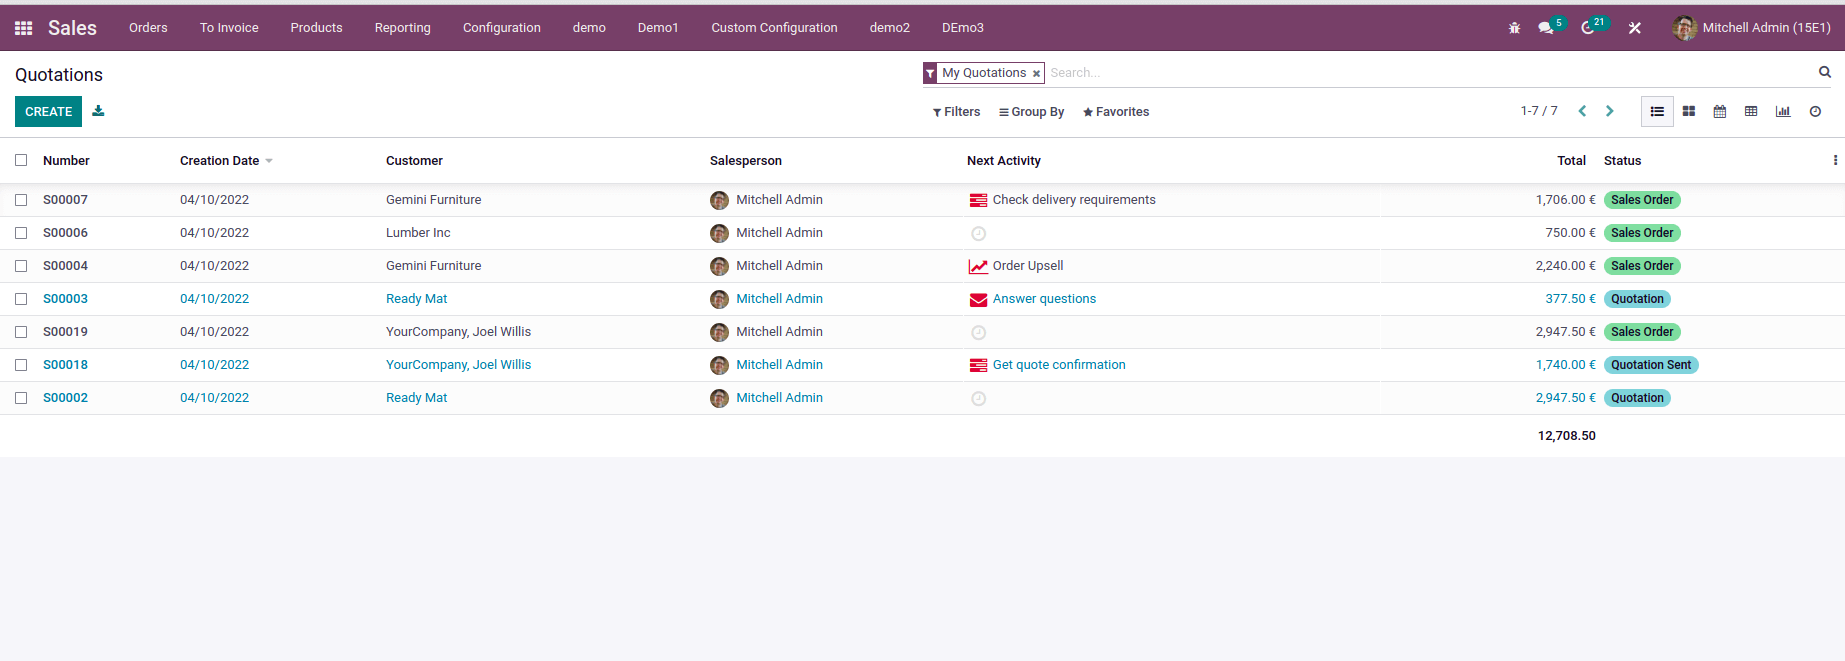 views-and-inheritance-of-view-in-odoo-15